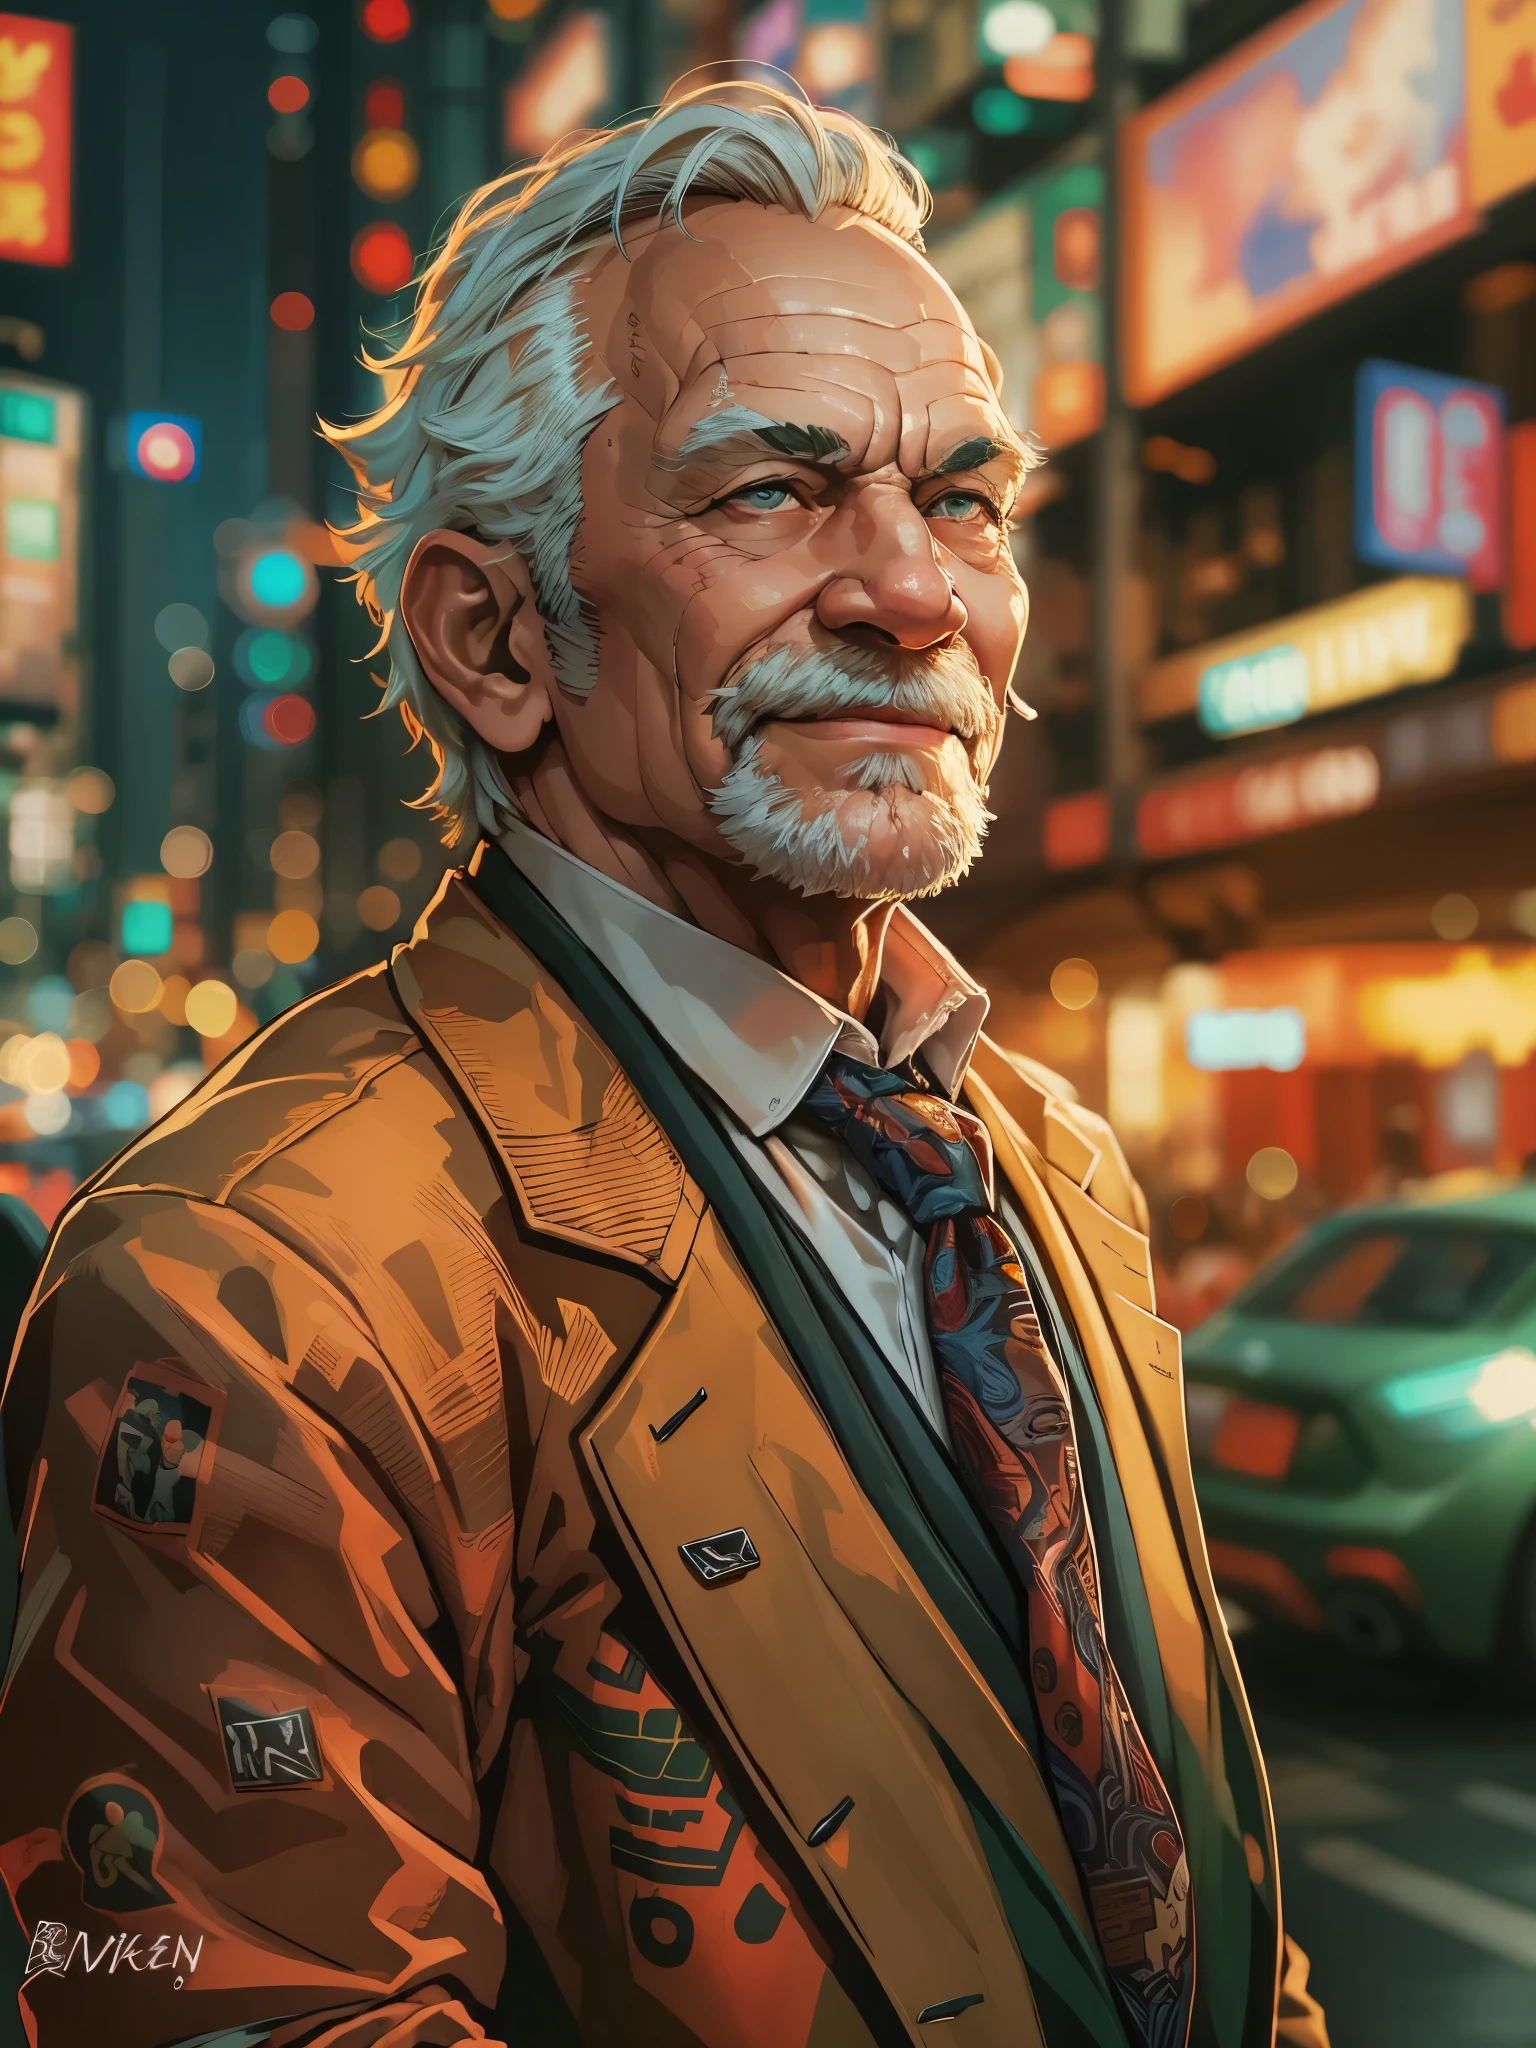 (best quality,4k,8k,highres,masterpiece:1.2),ultra-detailed,(realistic,photorealistic,photo-realistic:1.37),portrait, muscular old man, cityscape background, happy expression, autumn colors, stylish suits and ties, vector art style, mwvector, vibrant colors, warm lighting, flowing hair, elderly wrinkles, fine facial features, confident posture, bustling urban atmosphere, vibrant city lights, sharp focus, professional digital painting.